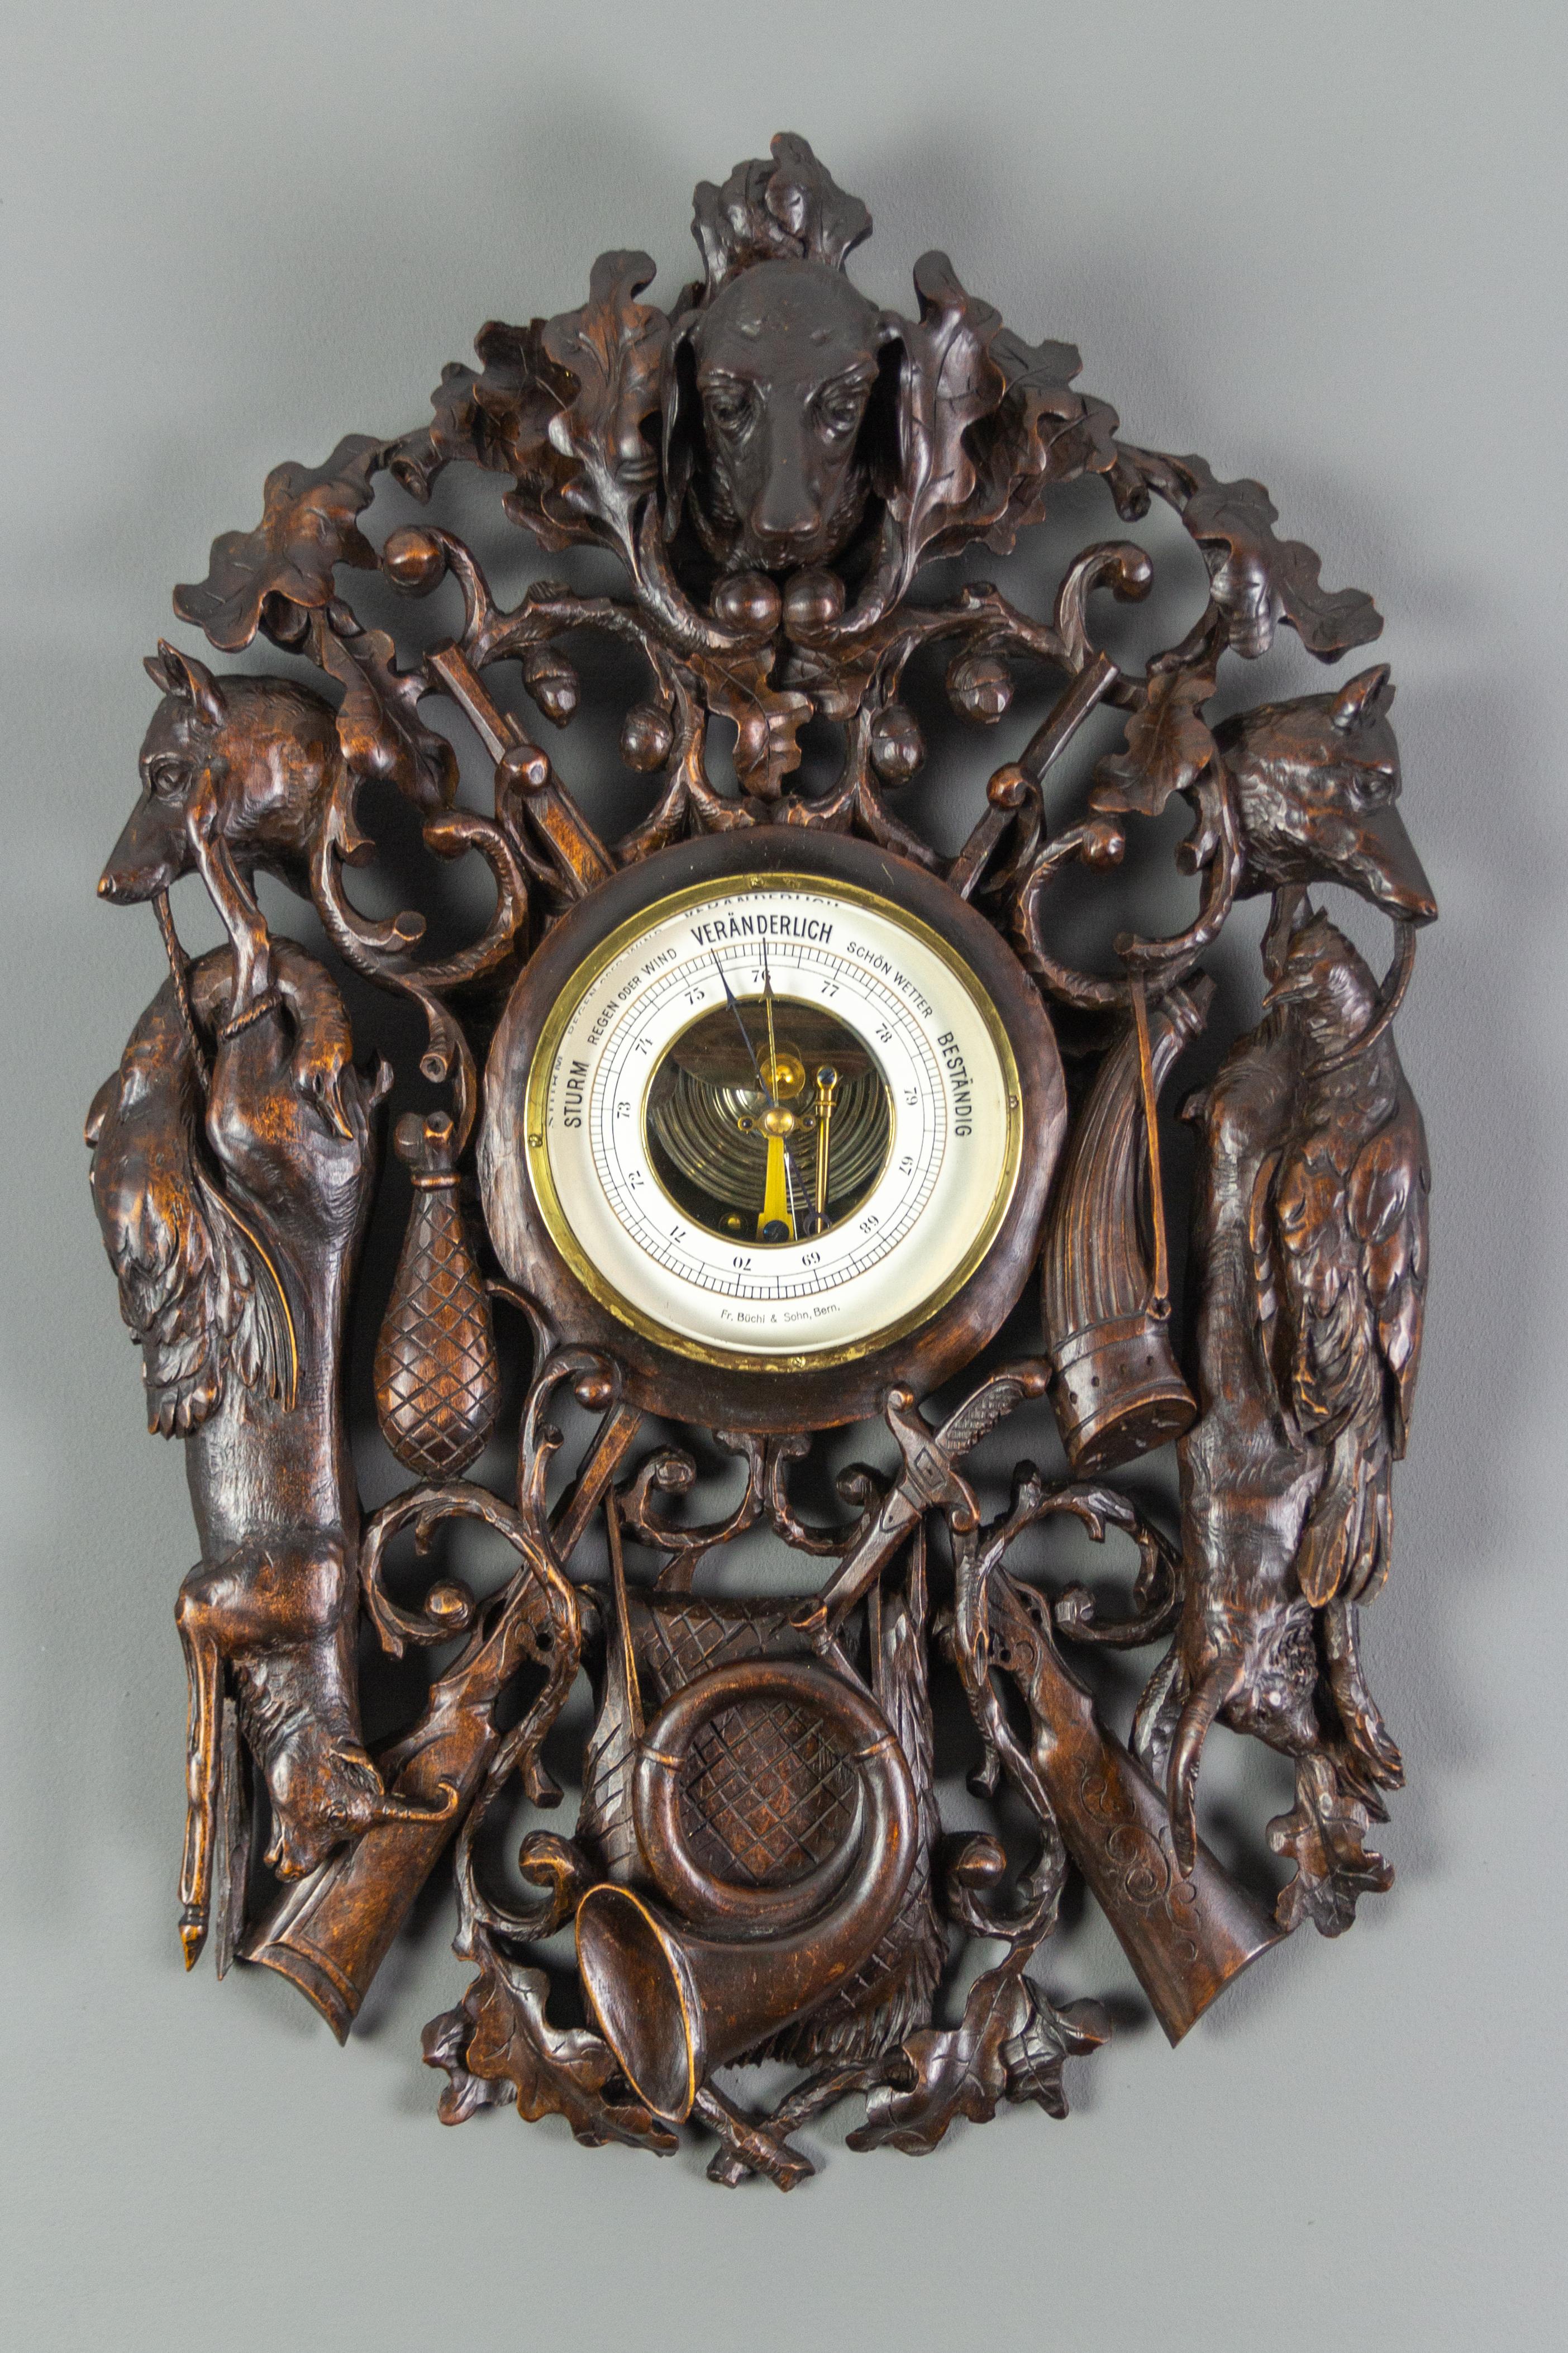 Swiss wall-mounted barometer richly decorated with elaborate hand-carved hunting trophies, Brienz, late 19th century.
This antique barometer features a background of magnificent carvings depicting detailed hunting motifs, oak leaves, and acorns. Dog